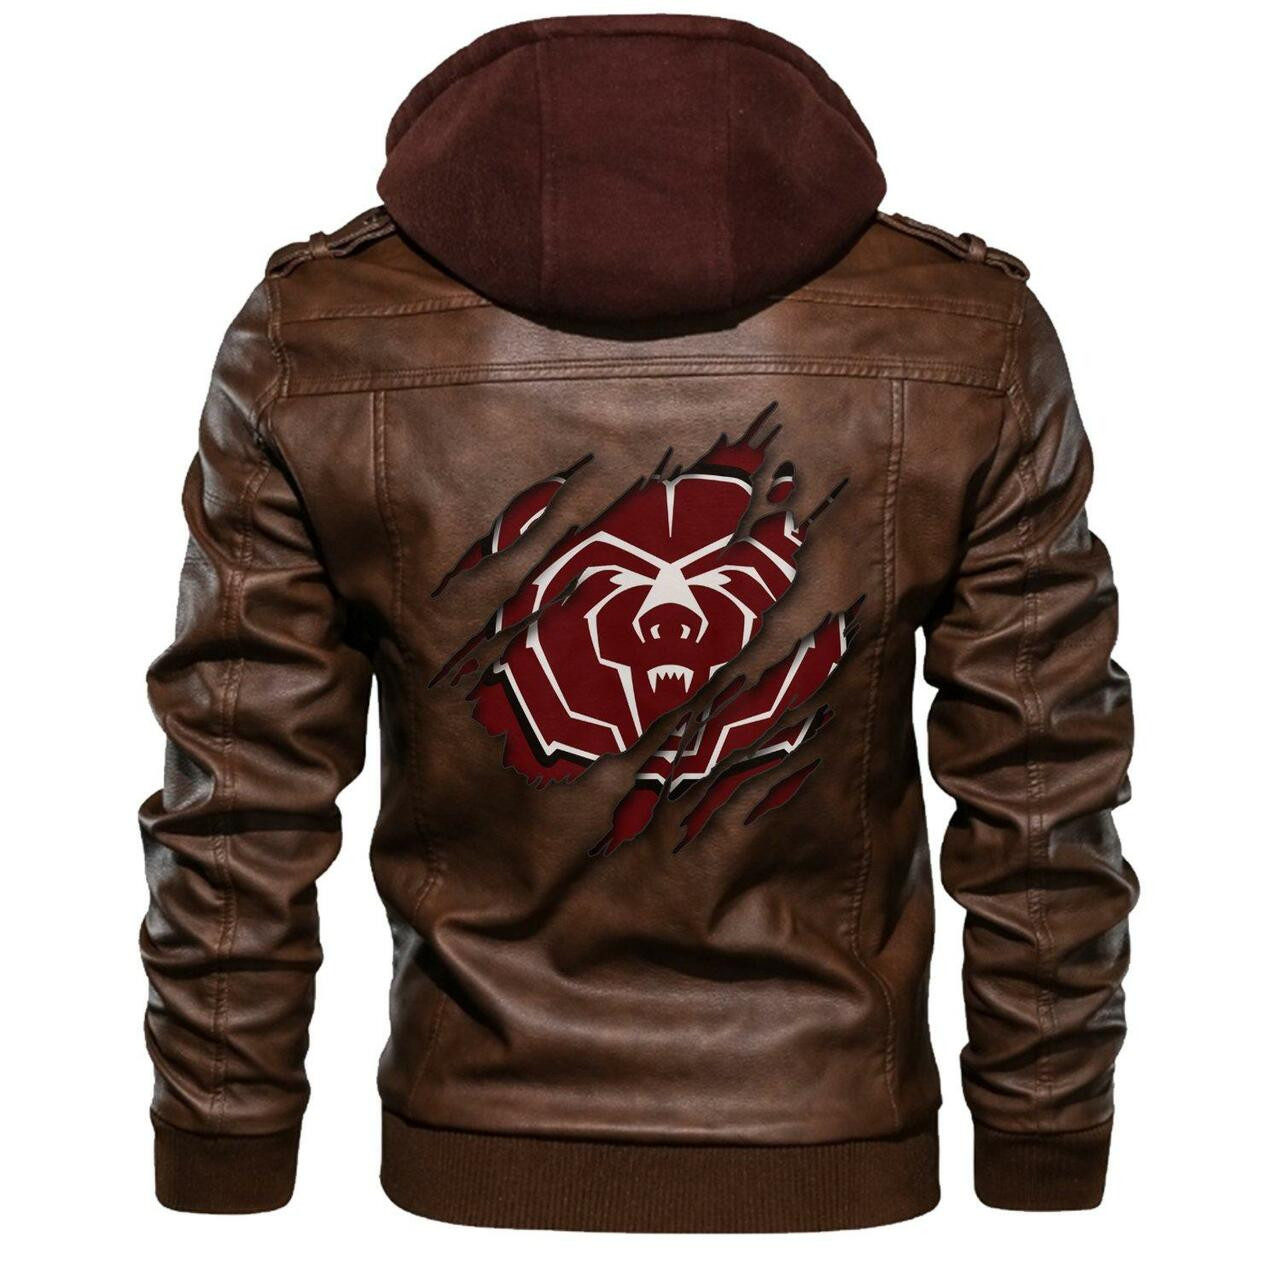 To get a great look, consider purchasing This New Leather Jacket 106